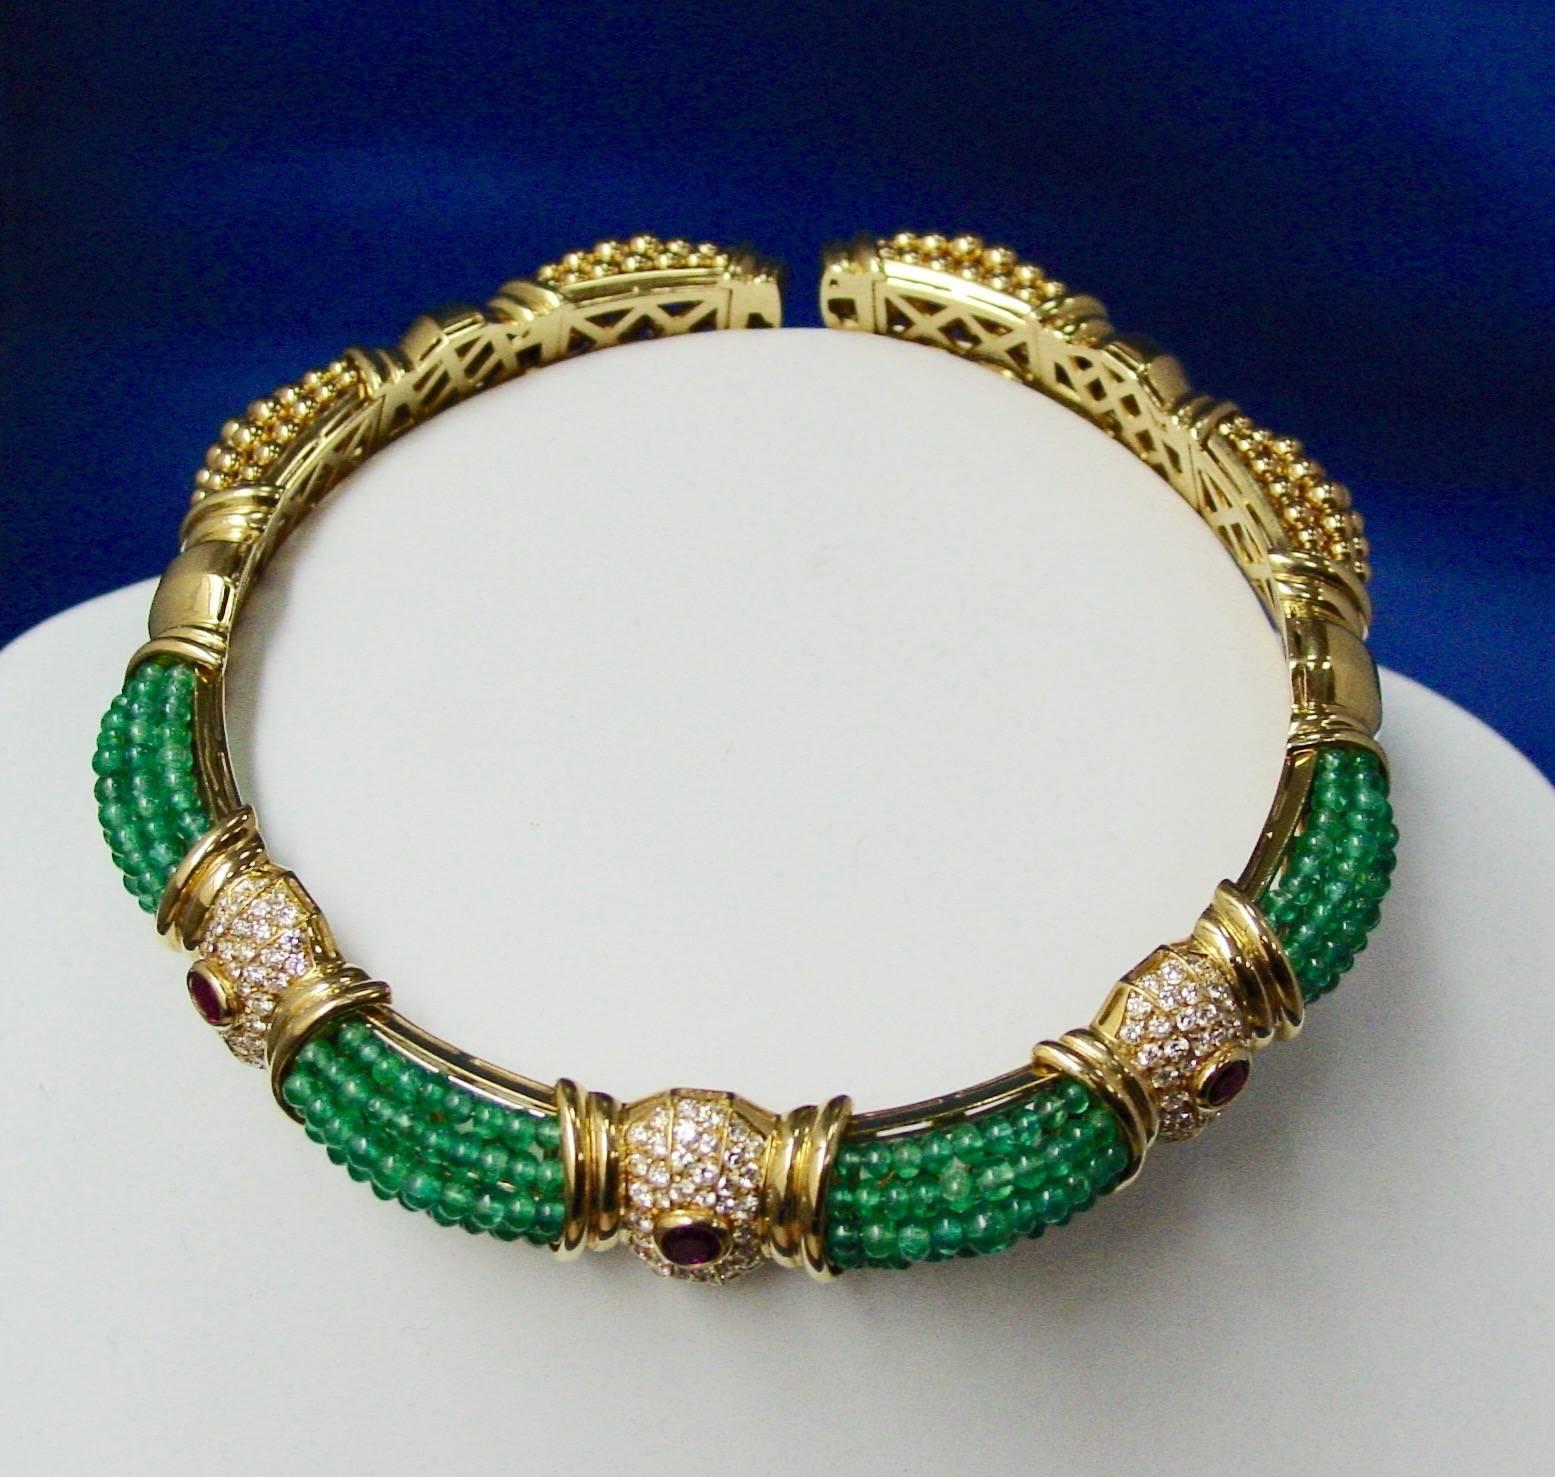 This lovely choker is a lively combination of  18 karat yellow gold and emerald beads highlighted by three sections each comprising an oval cut ruby surrounded by round brilliant diamonds, all mounted in 18 karat yellow gold.  The choker features